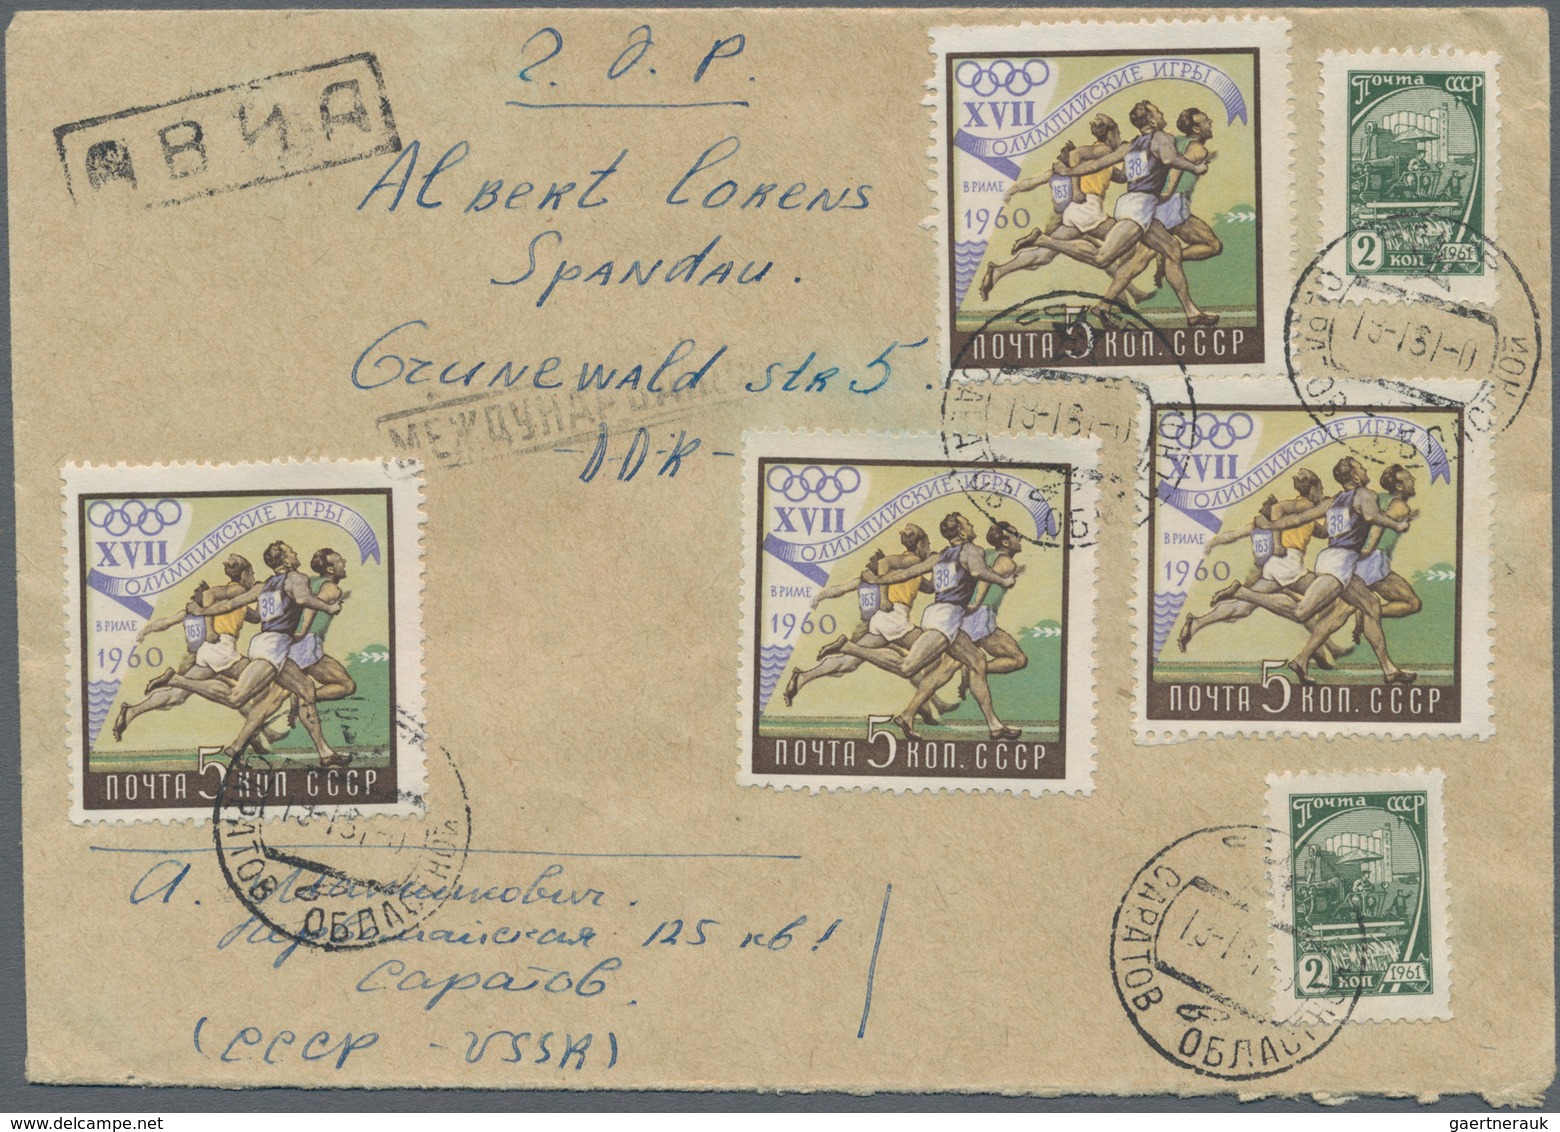 Sowjetunion: 1903/1961, assortment of apprx. 95 covers/cards, showing a nice range of interesting fr